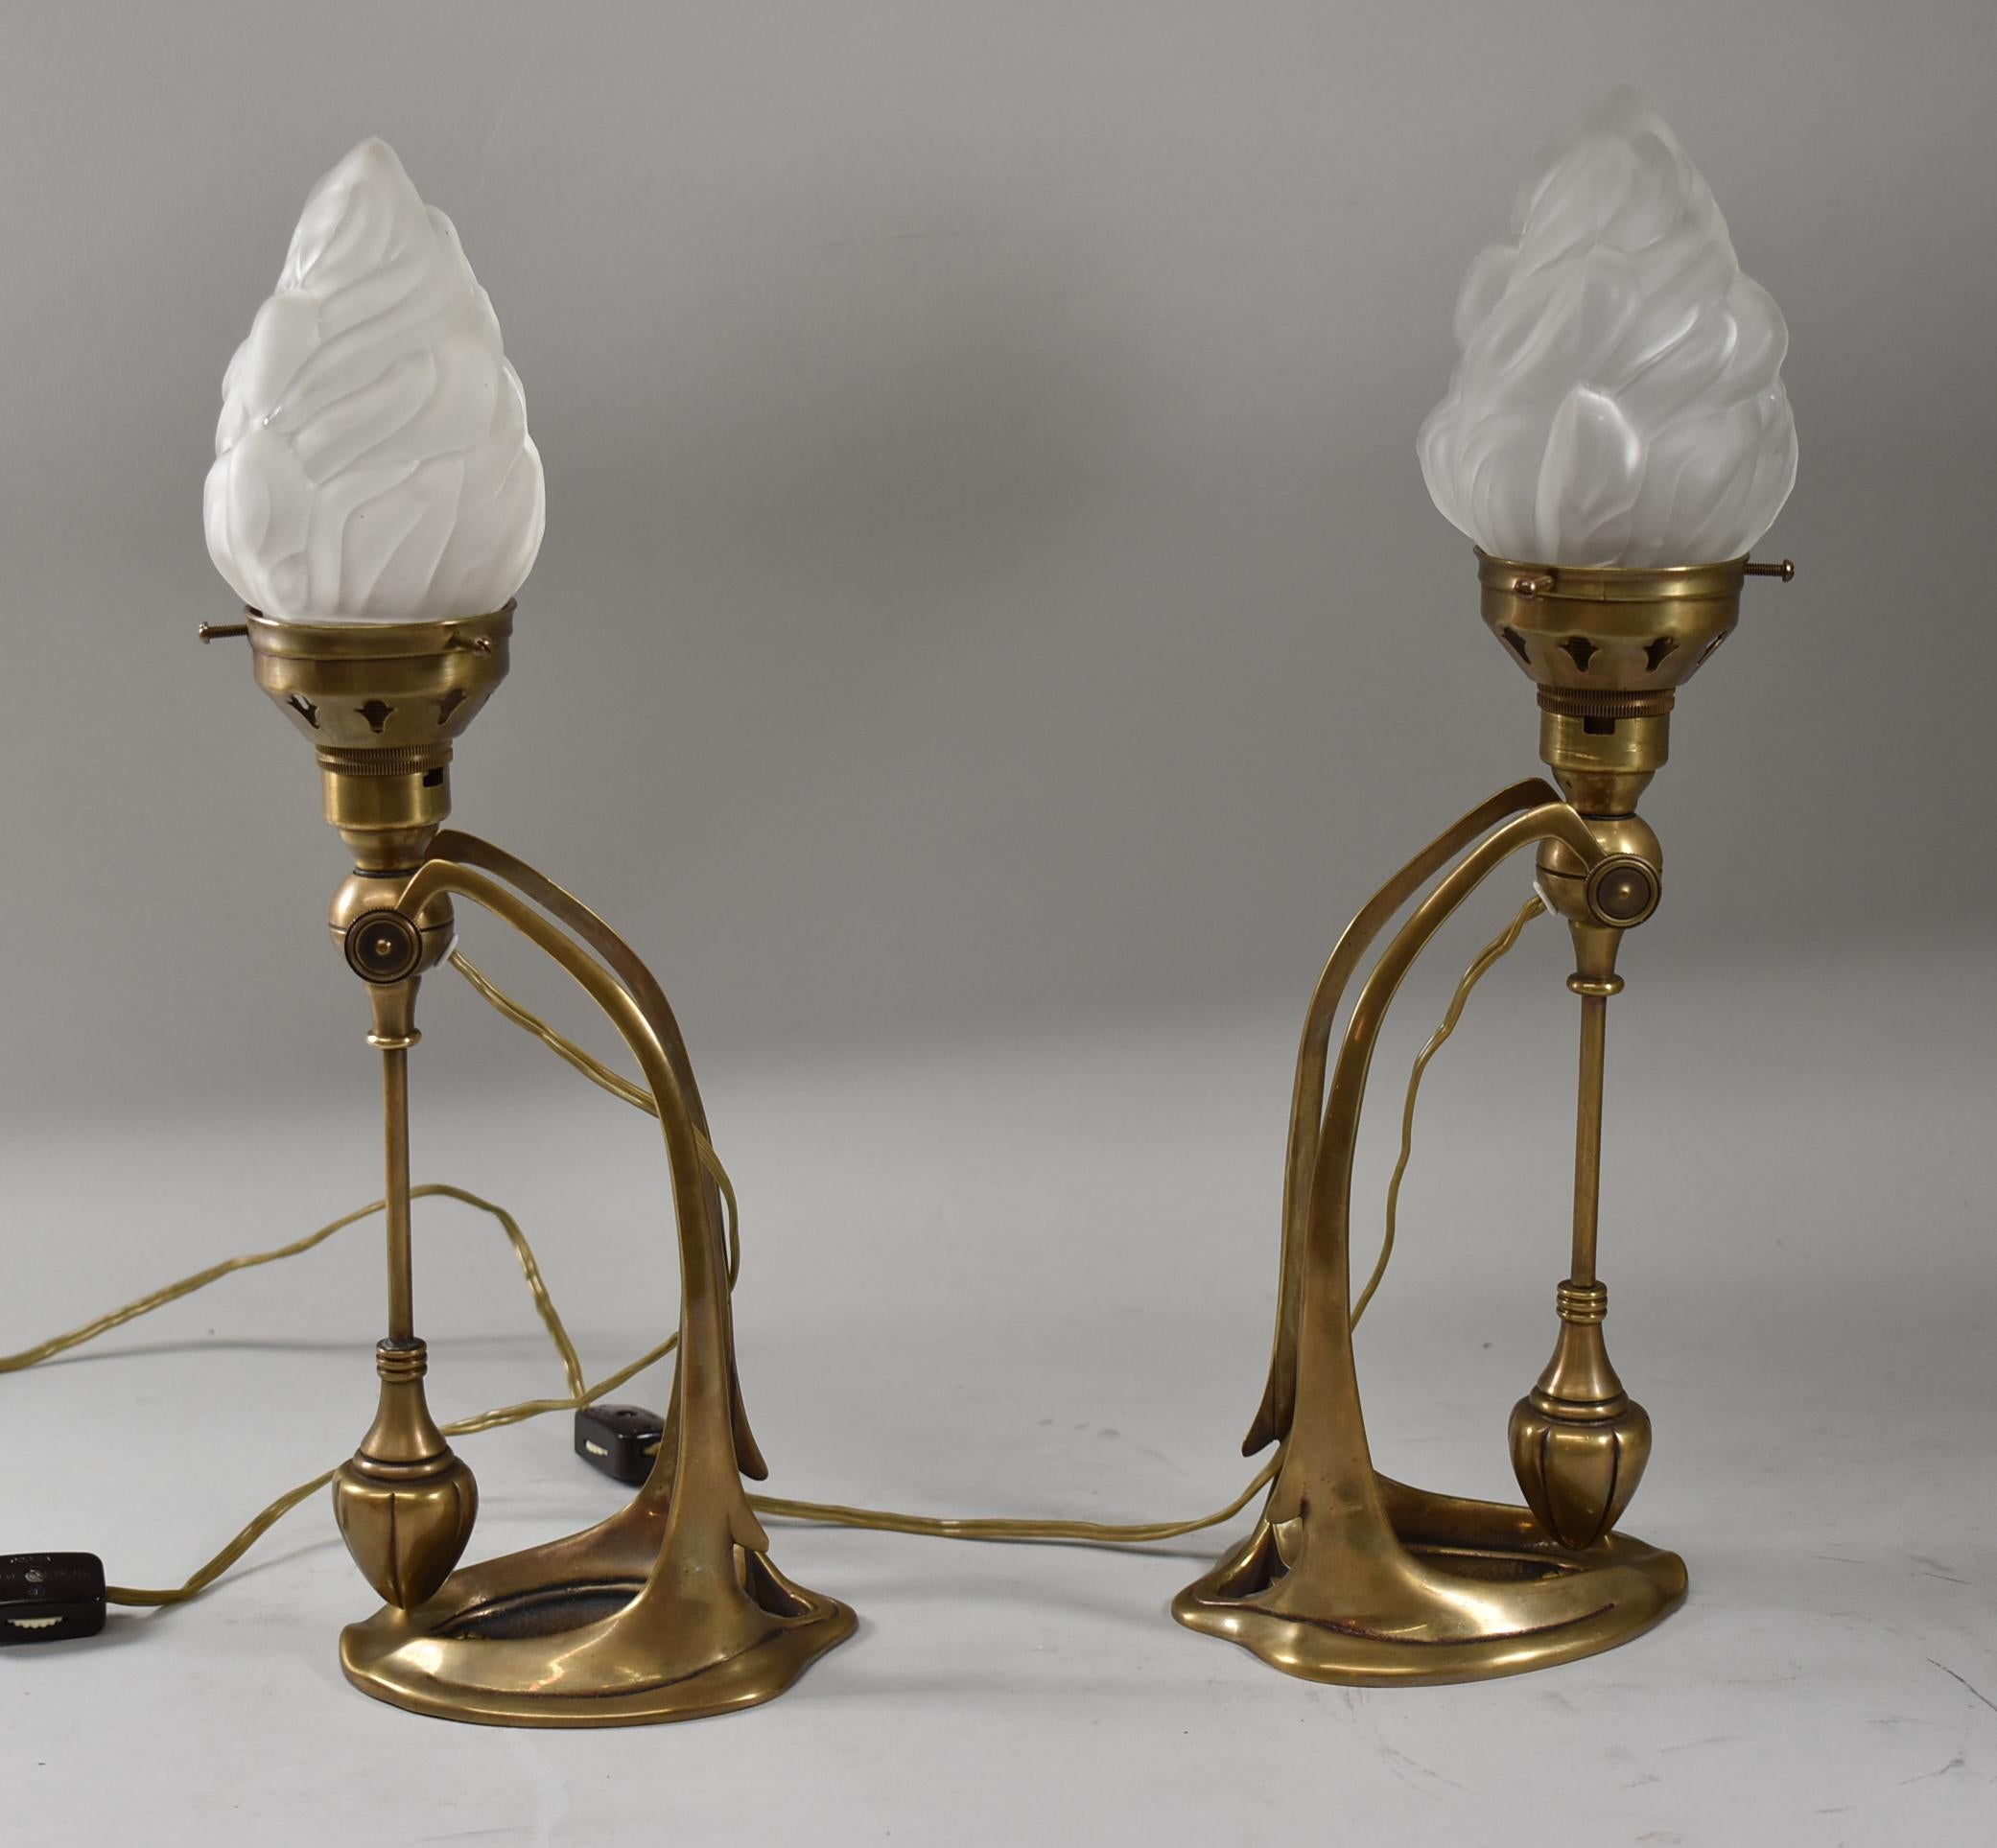 Pair of Art Nouveau style bronze mantle lamps with vintage opaque flame shape glass shades. Measures: 10.5